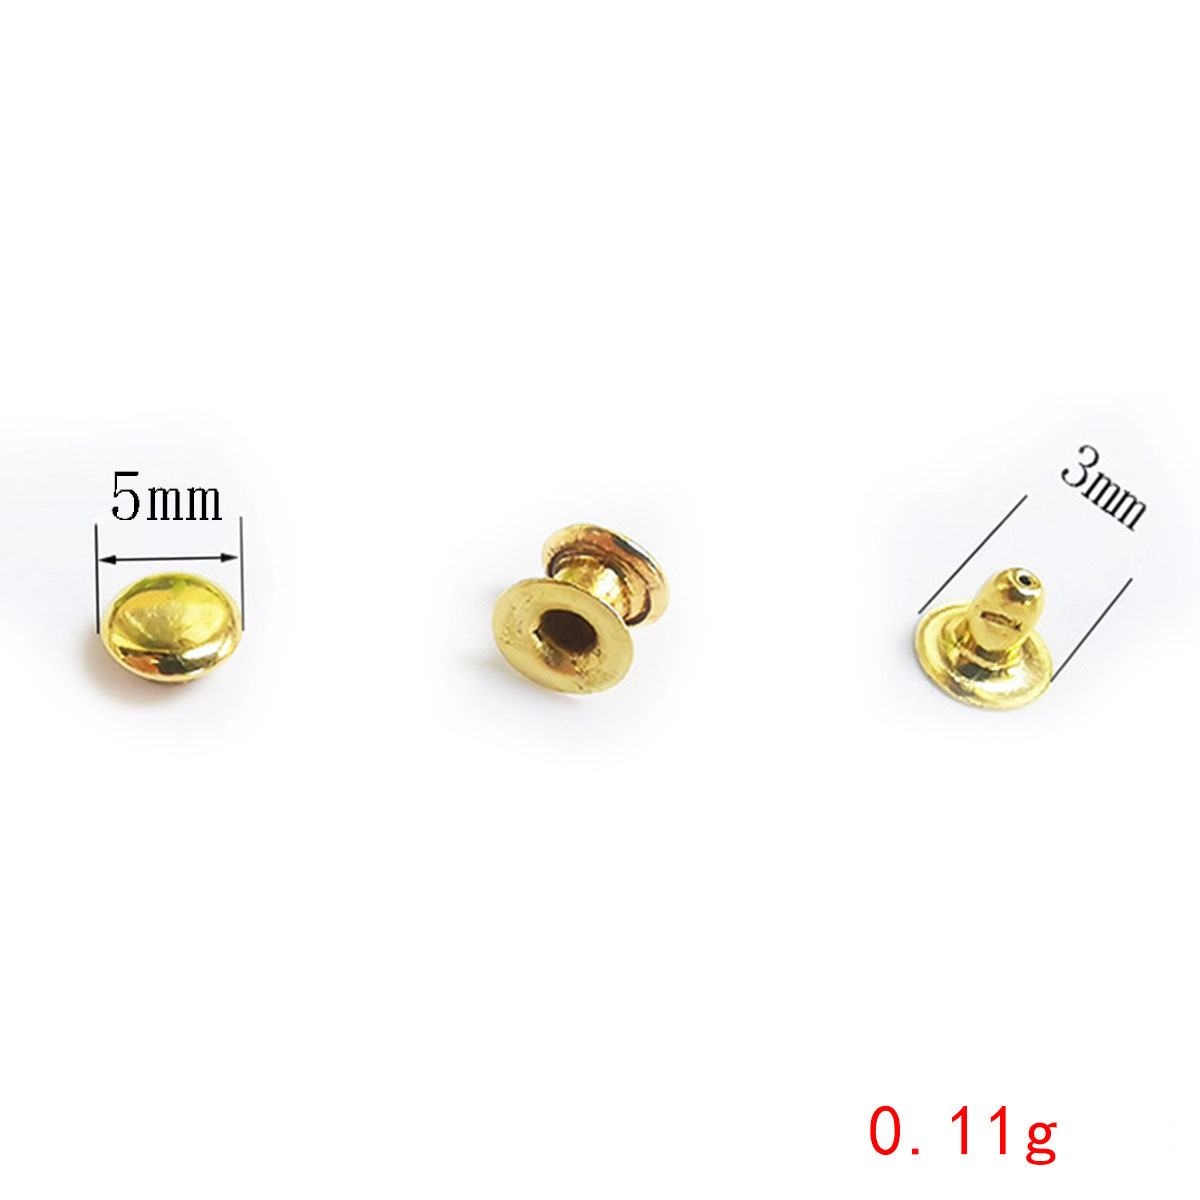 11:5mm gold